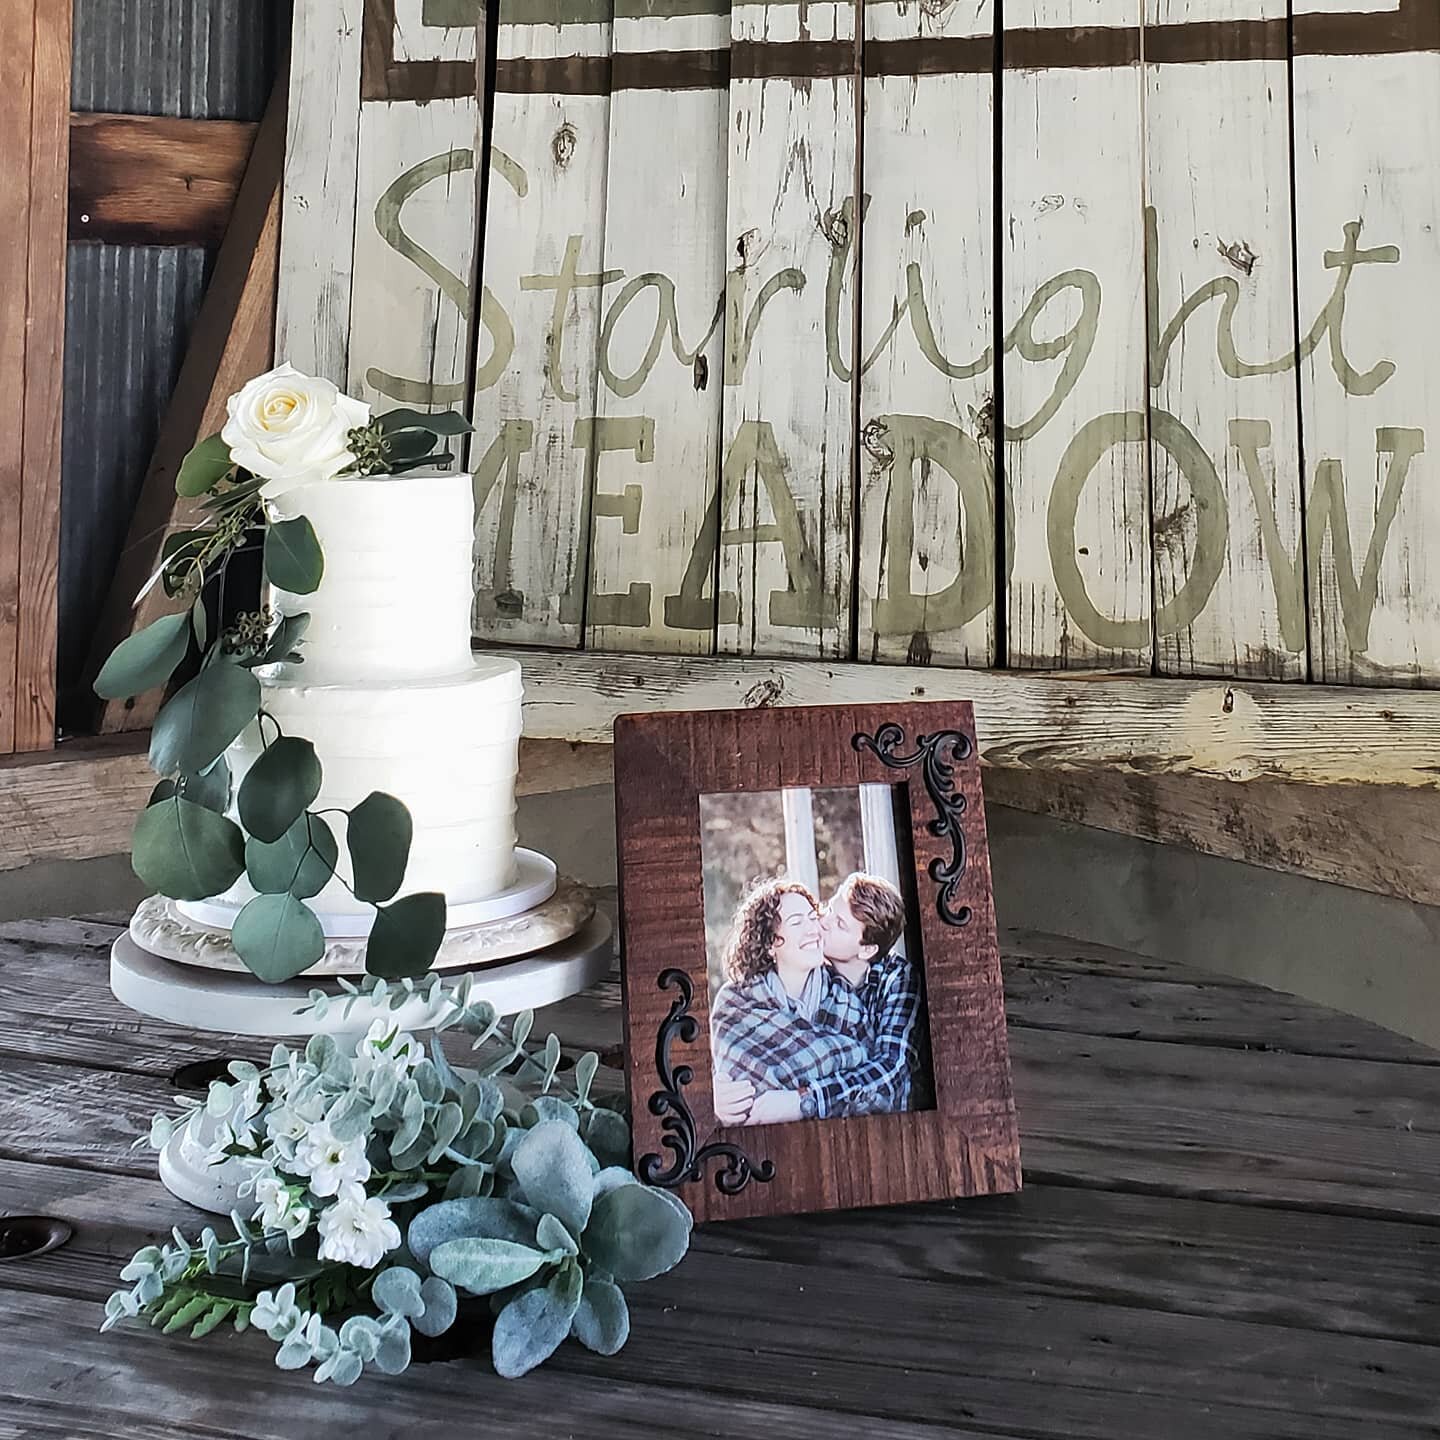 It was our first event @starlightmeadownc and it was so beautiful! We can't wait to do many more. #simplewedding #simplecakes #simplecake #whitecake #whitecakes #buttercreamcakes #buttercream #buttercreamcake #weddingcakes #weddings #weddingcake #sup